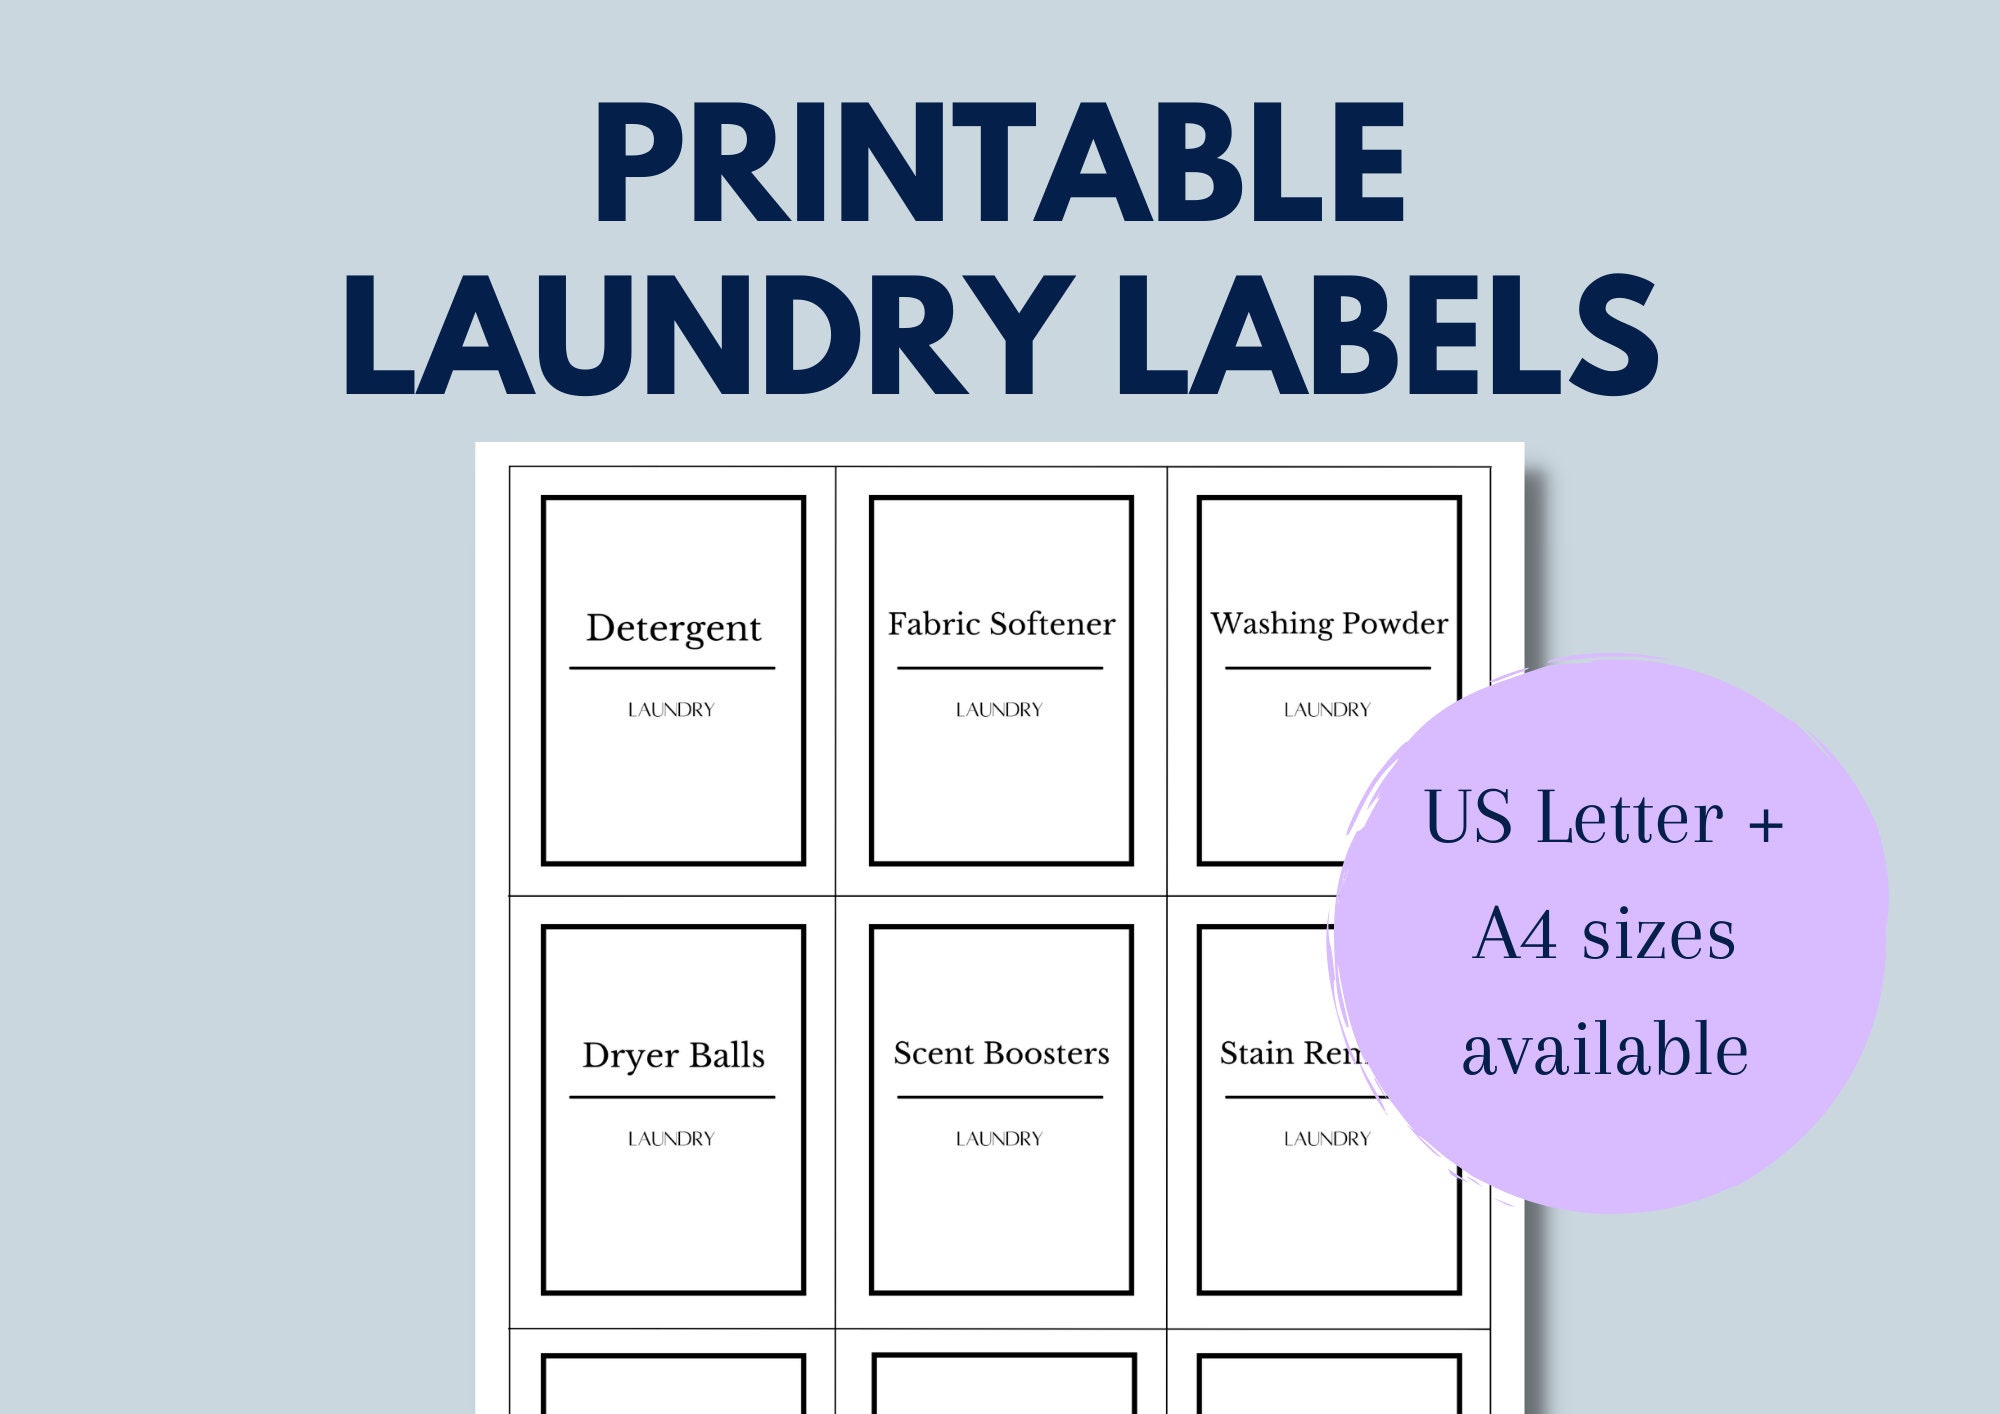 Laundry Labels Template, Custom Laundry Room Labels, Home Organization  Labels, Storage Label, Minimalist, Download, Editable, Printable, 039 